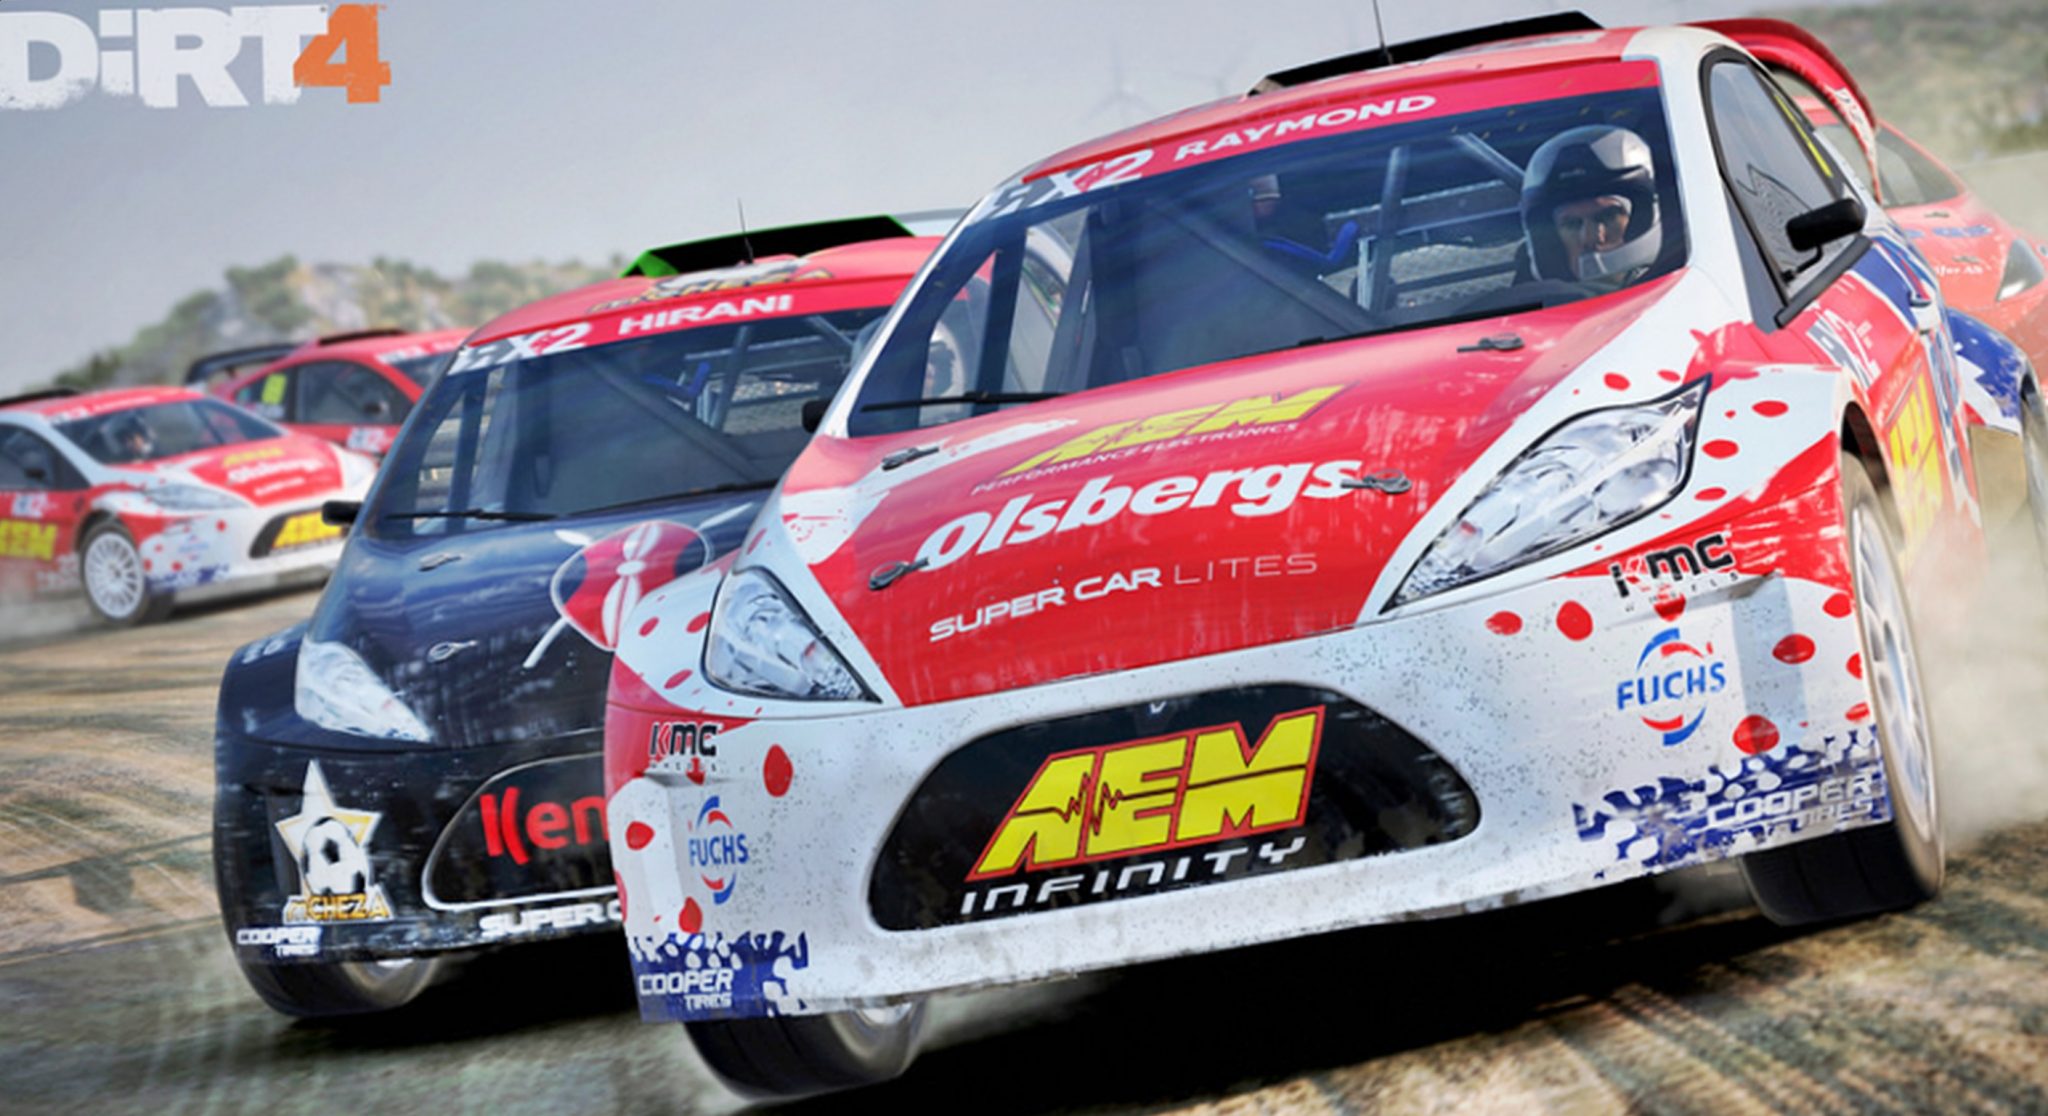 download dirt 5 reviews for free